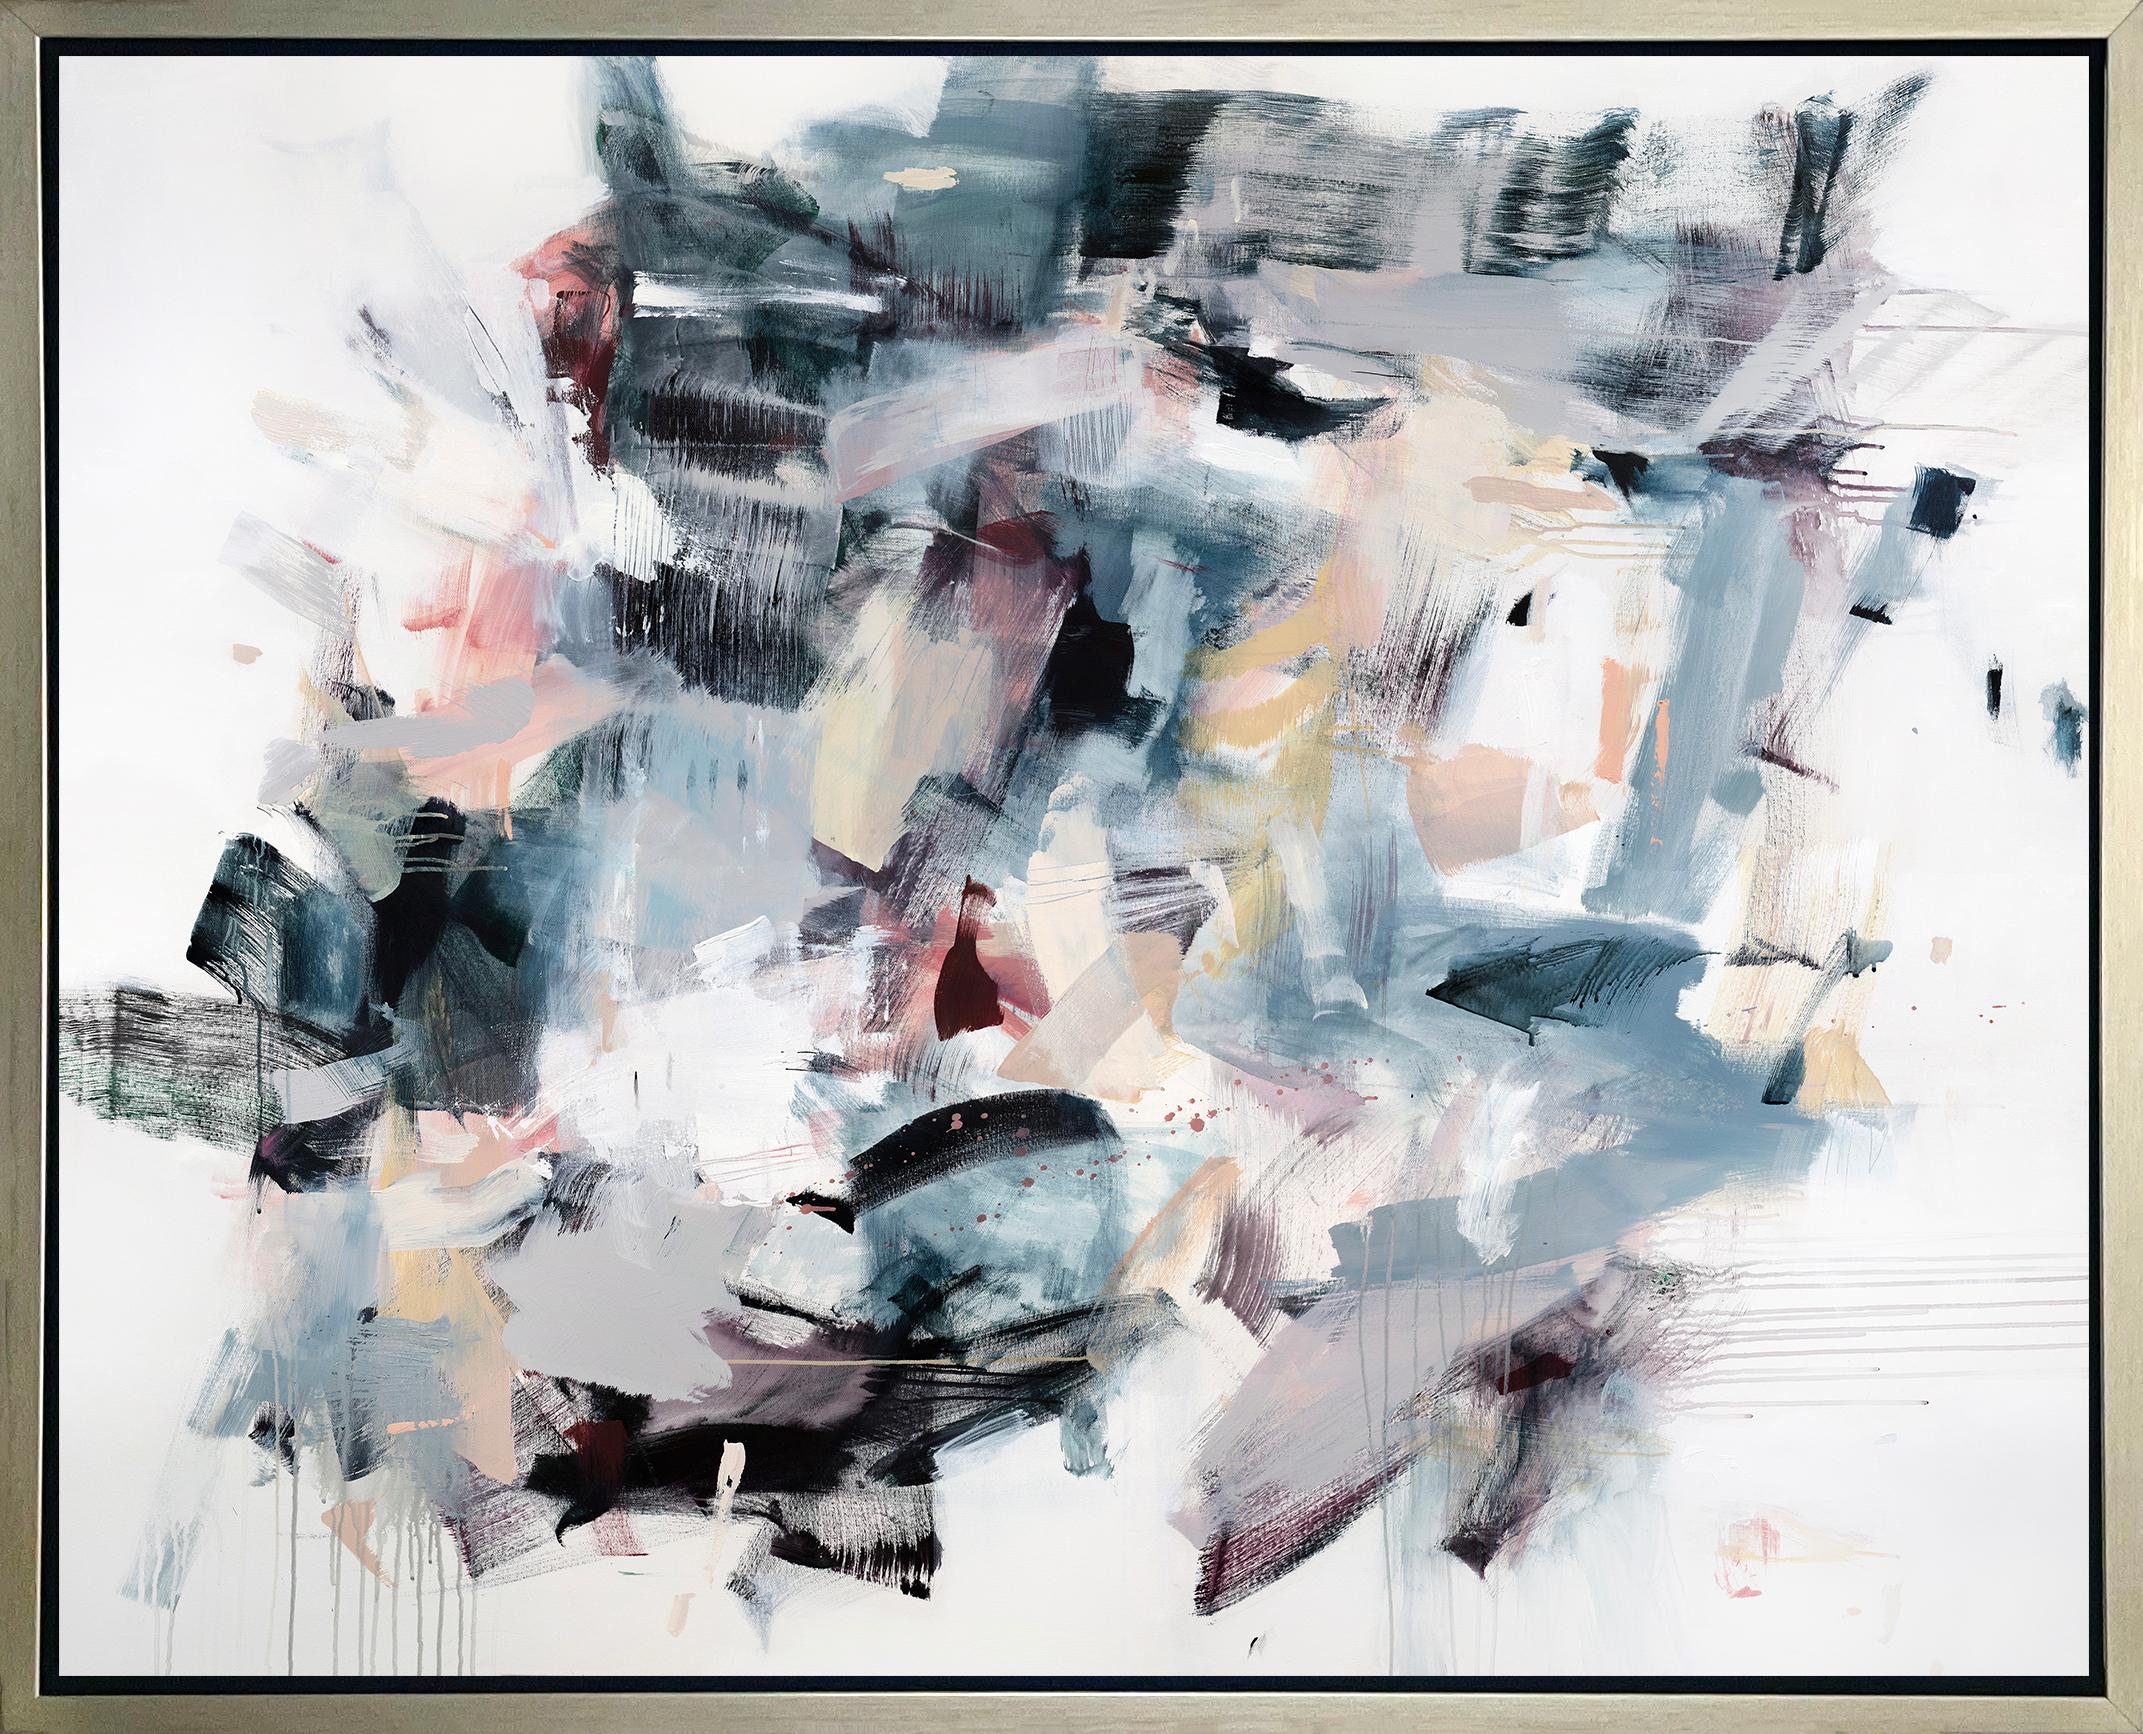 Kelly Rossetti Abstract Print - "Serotonin Overflow, " Framed Limited Edition Giclee Print, 40" x 50"